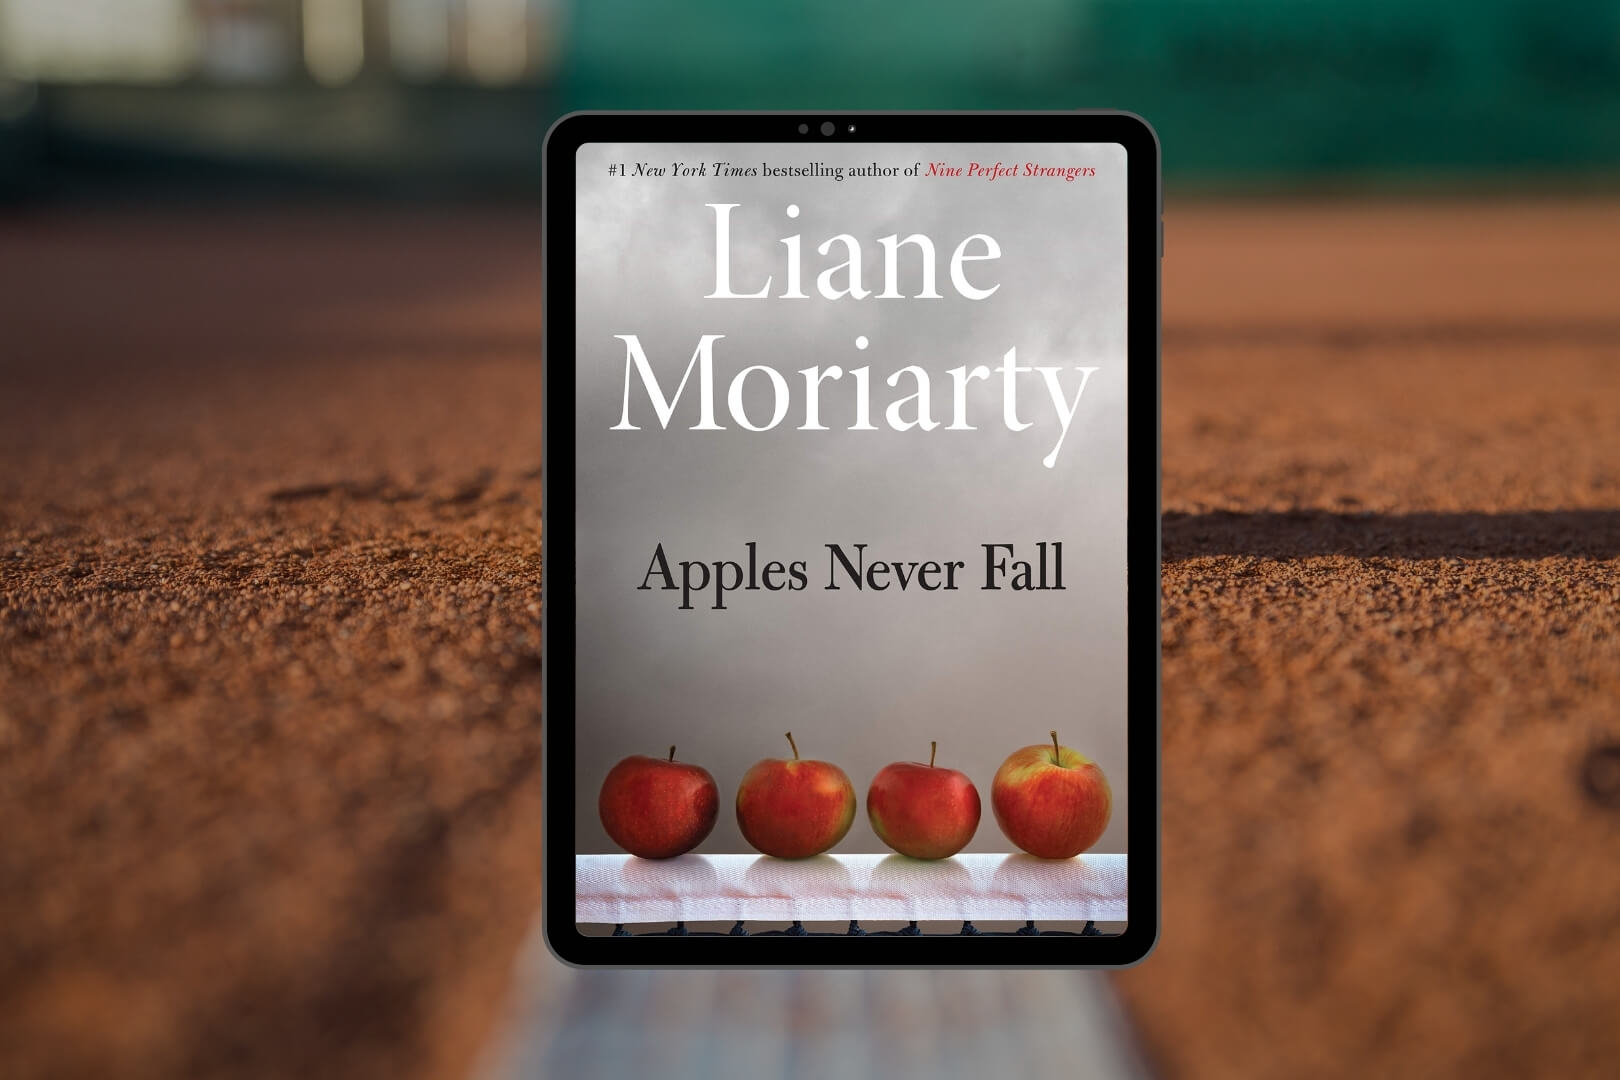 Review: Apples Never Fall by Liane Moriarty